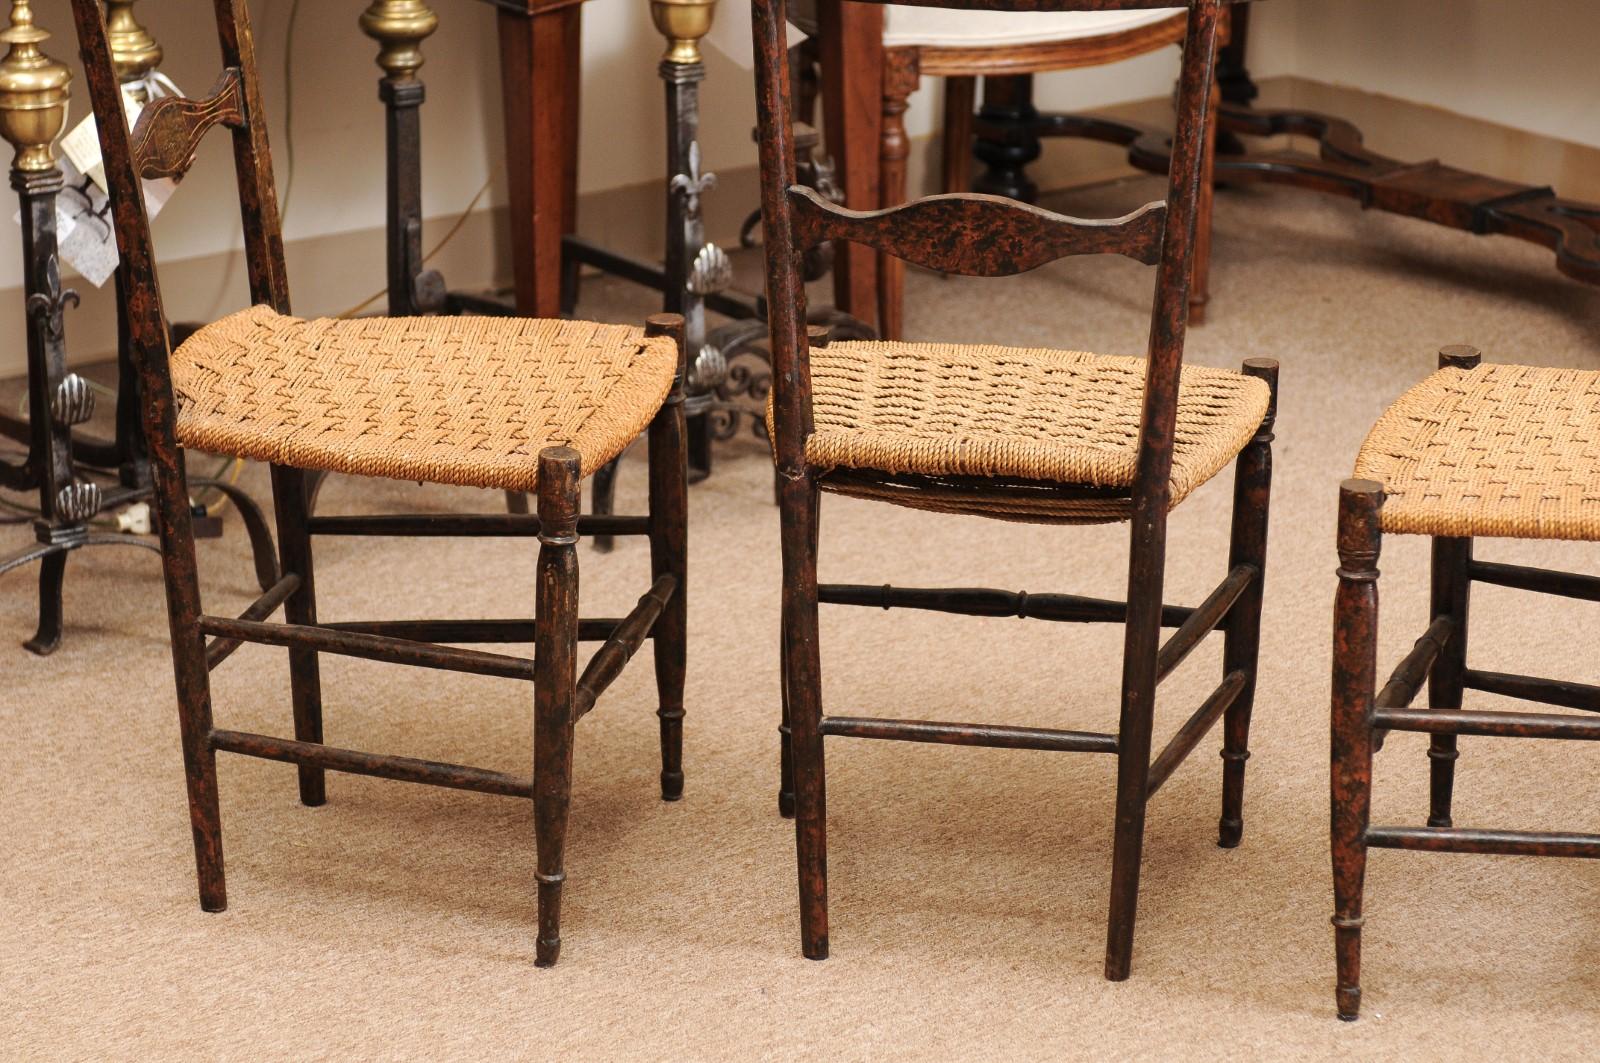 Pair of Neoclassical Black Painted Side Chairs with Woven Seats, Italy ca. 1790 For Sale 7